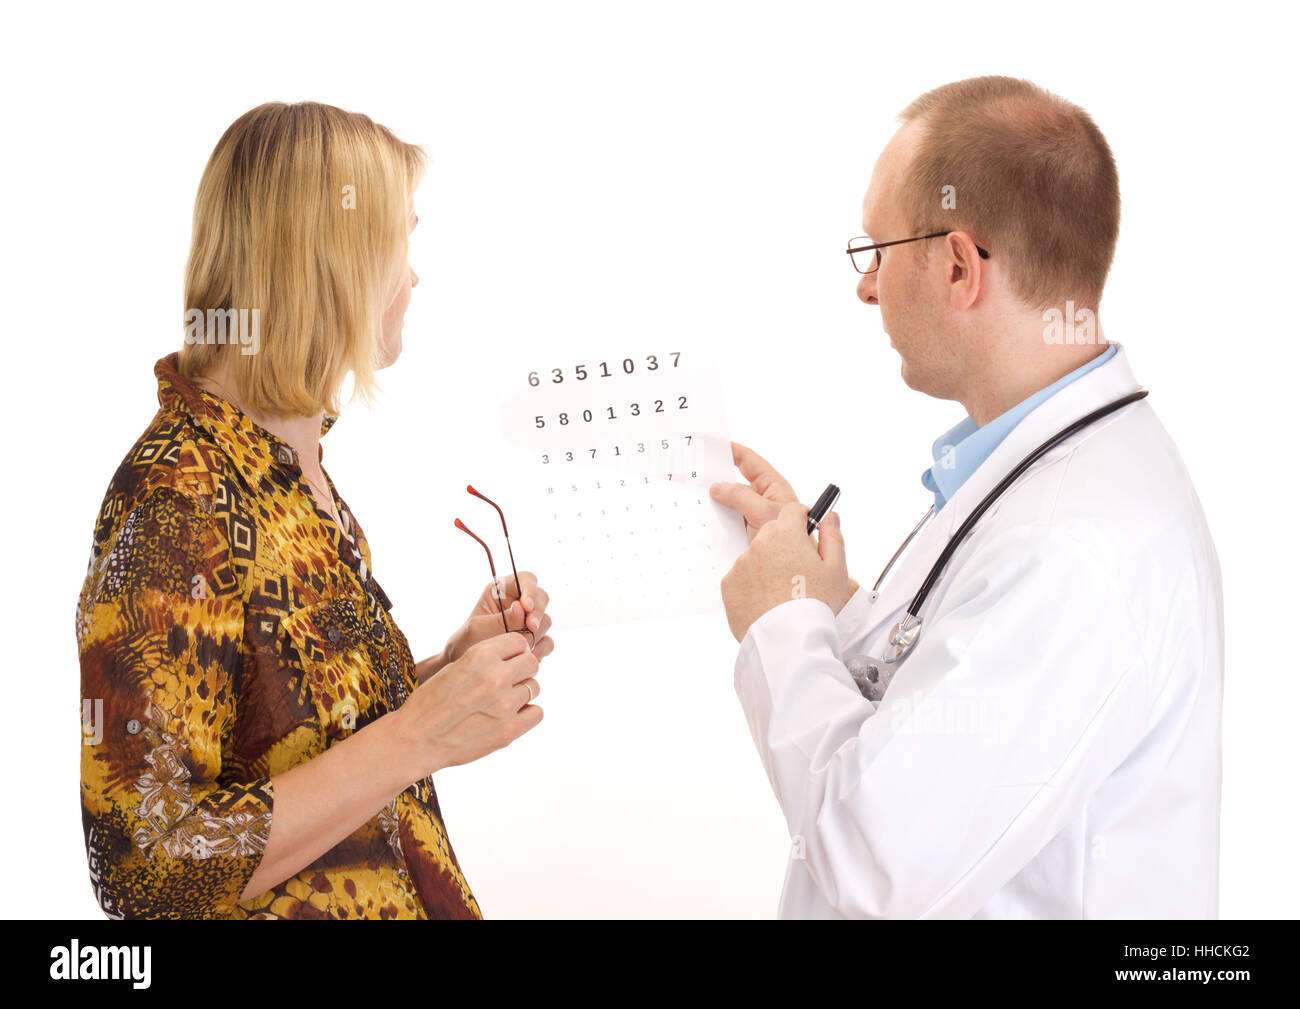 doctor, physician, medic, medical practicioner, woman, humans, human beings, Stock Photo